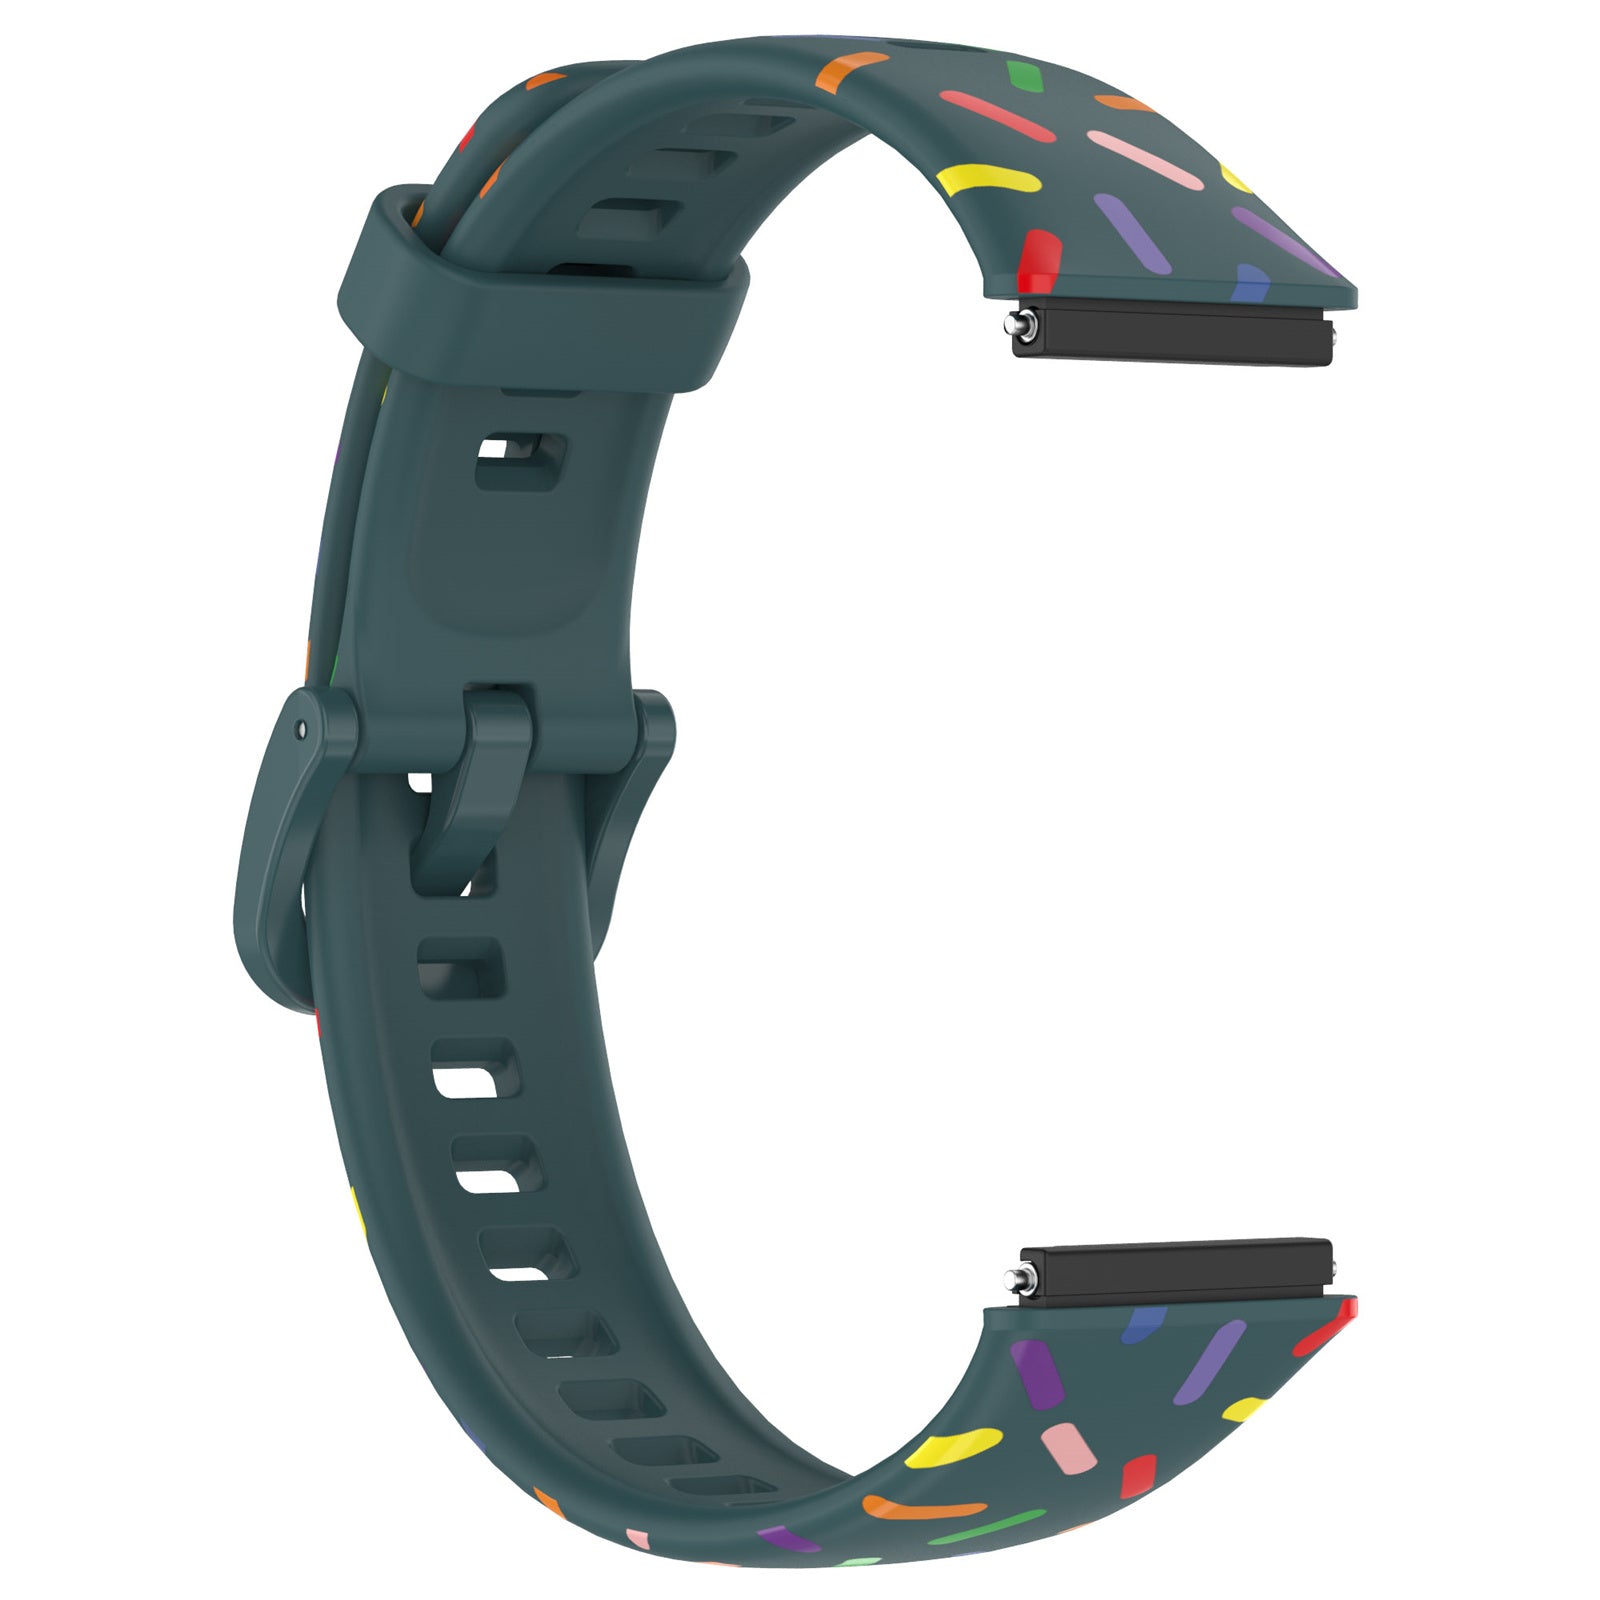 Uniqkart for Huawei Band 7 Colorful Spotted Wrist Band Replacement Silicone Watch Strap - Green